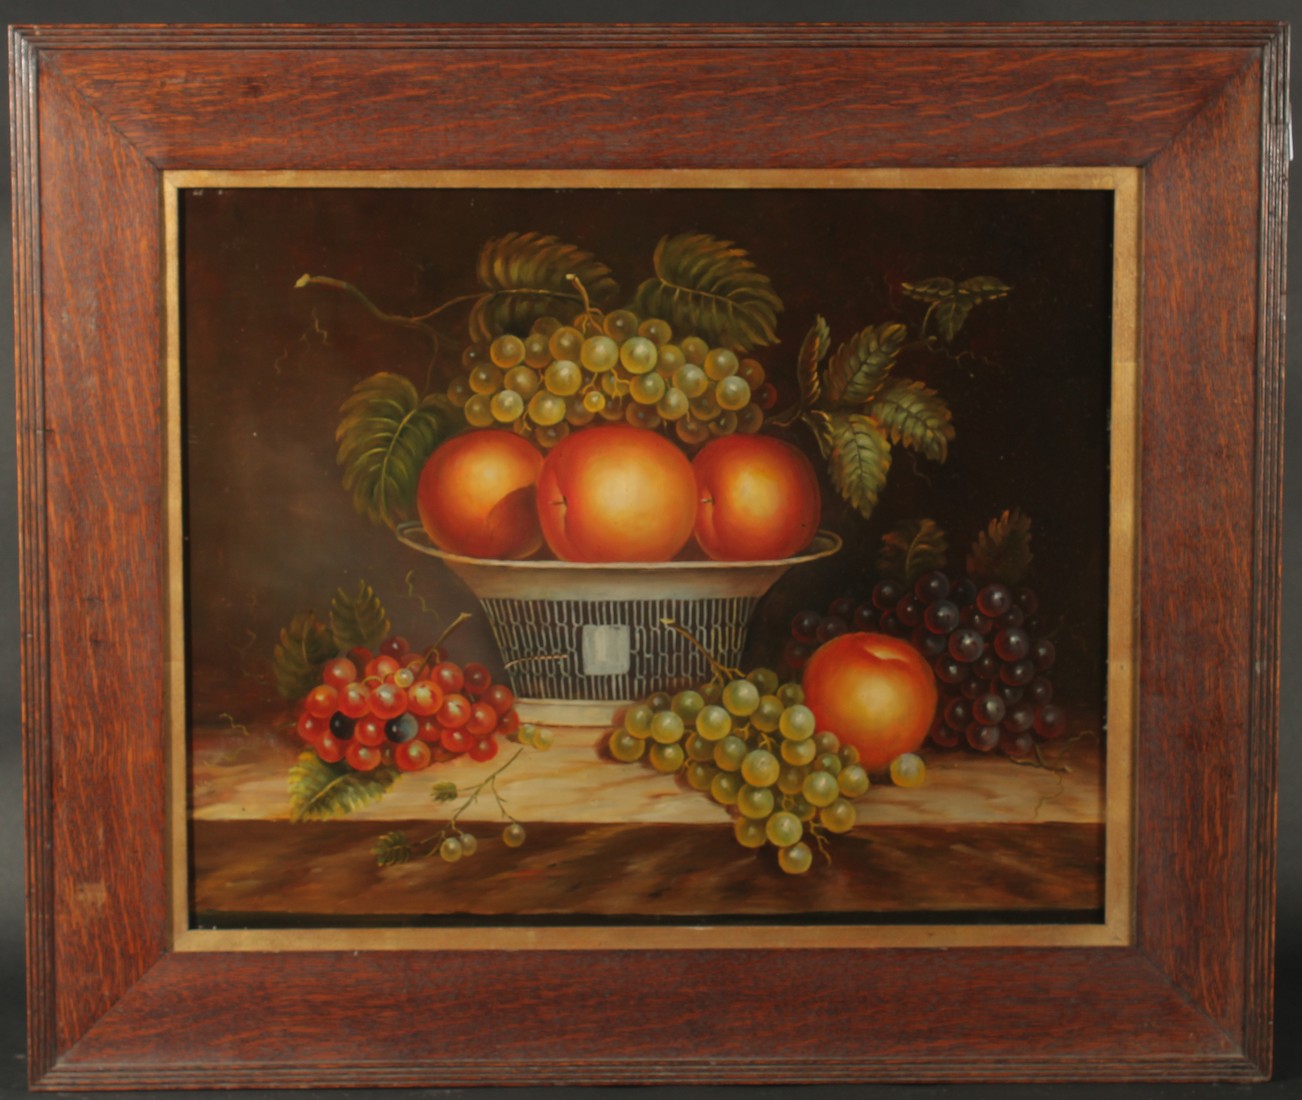 20th Century, A still life of apples and grapes on a ledge, oil on panel, 16" x 20", (40.5x51cm).